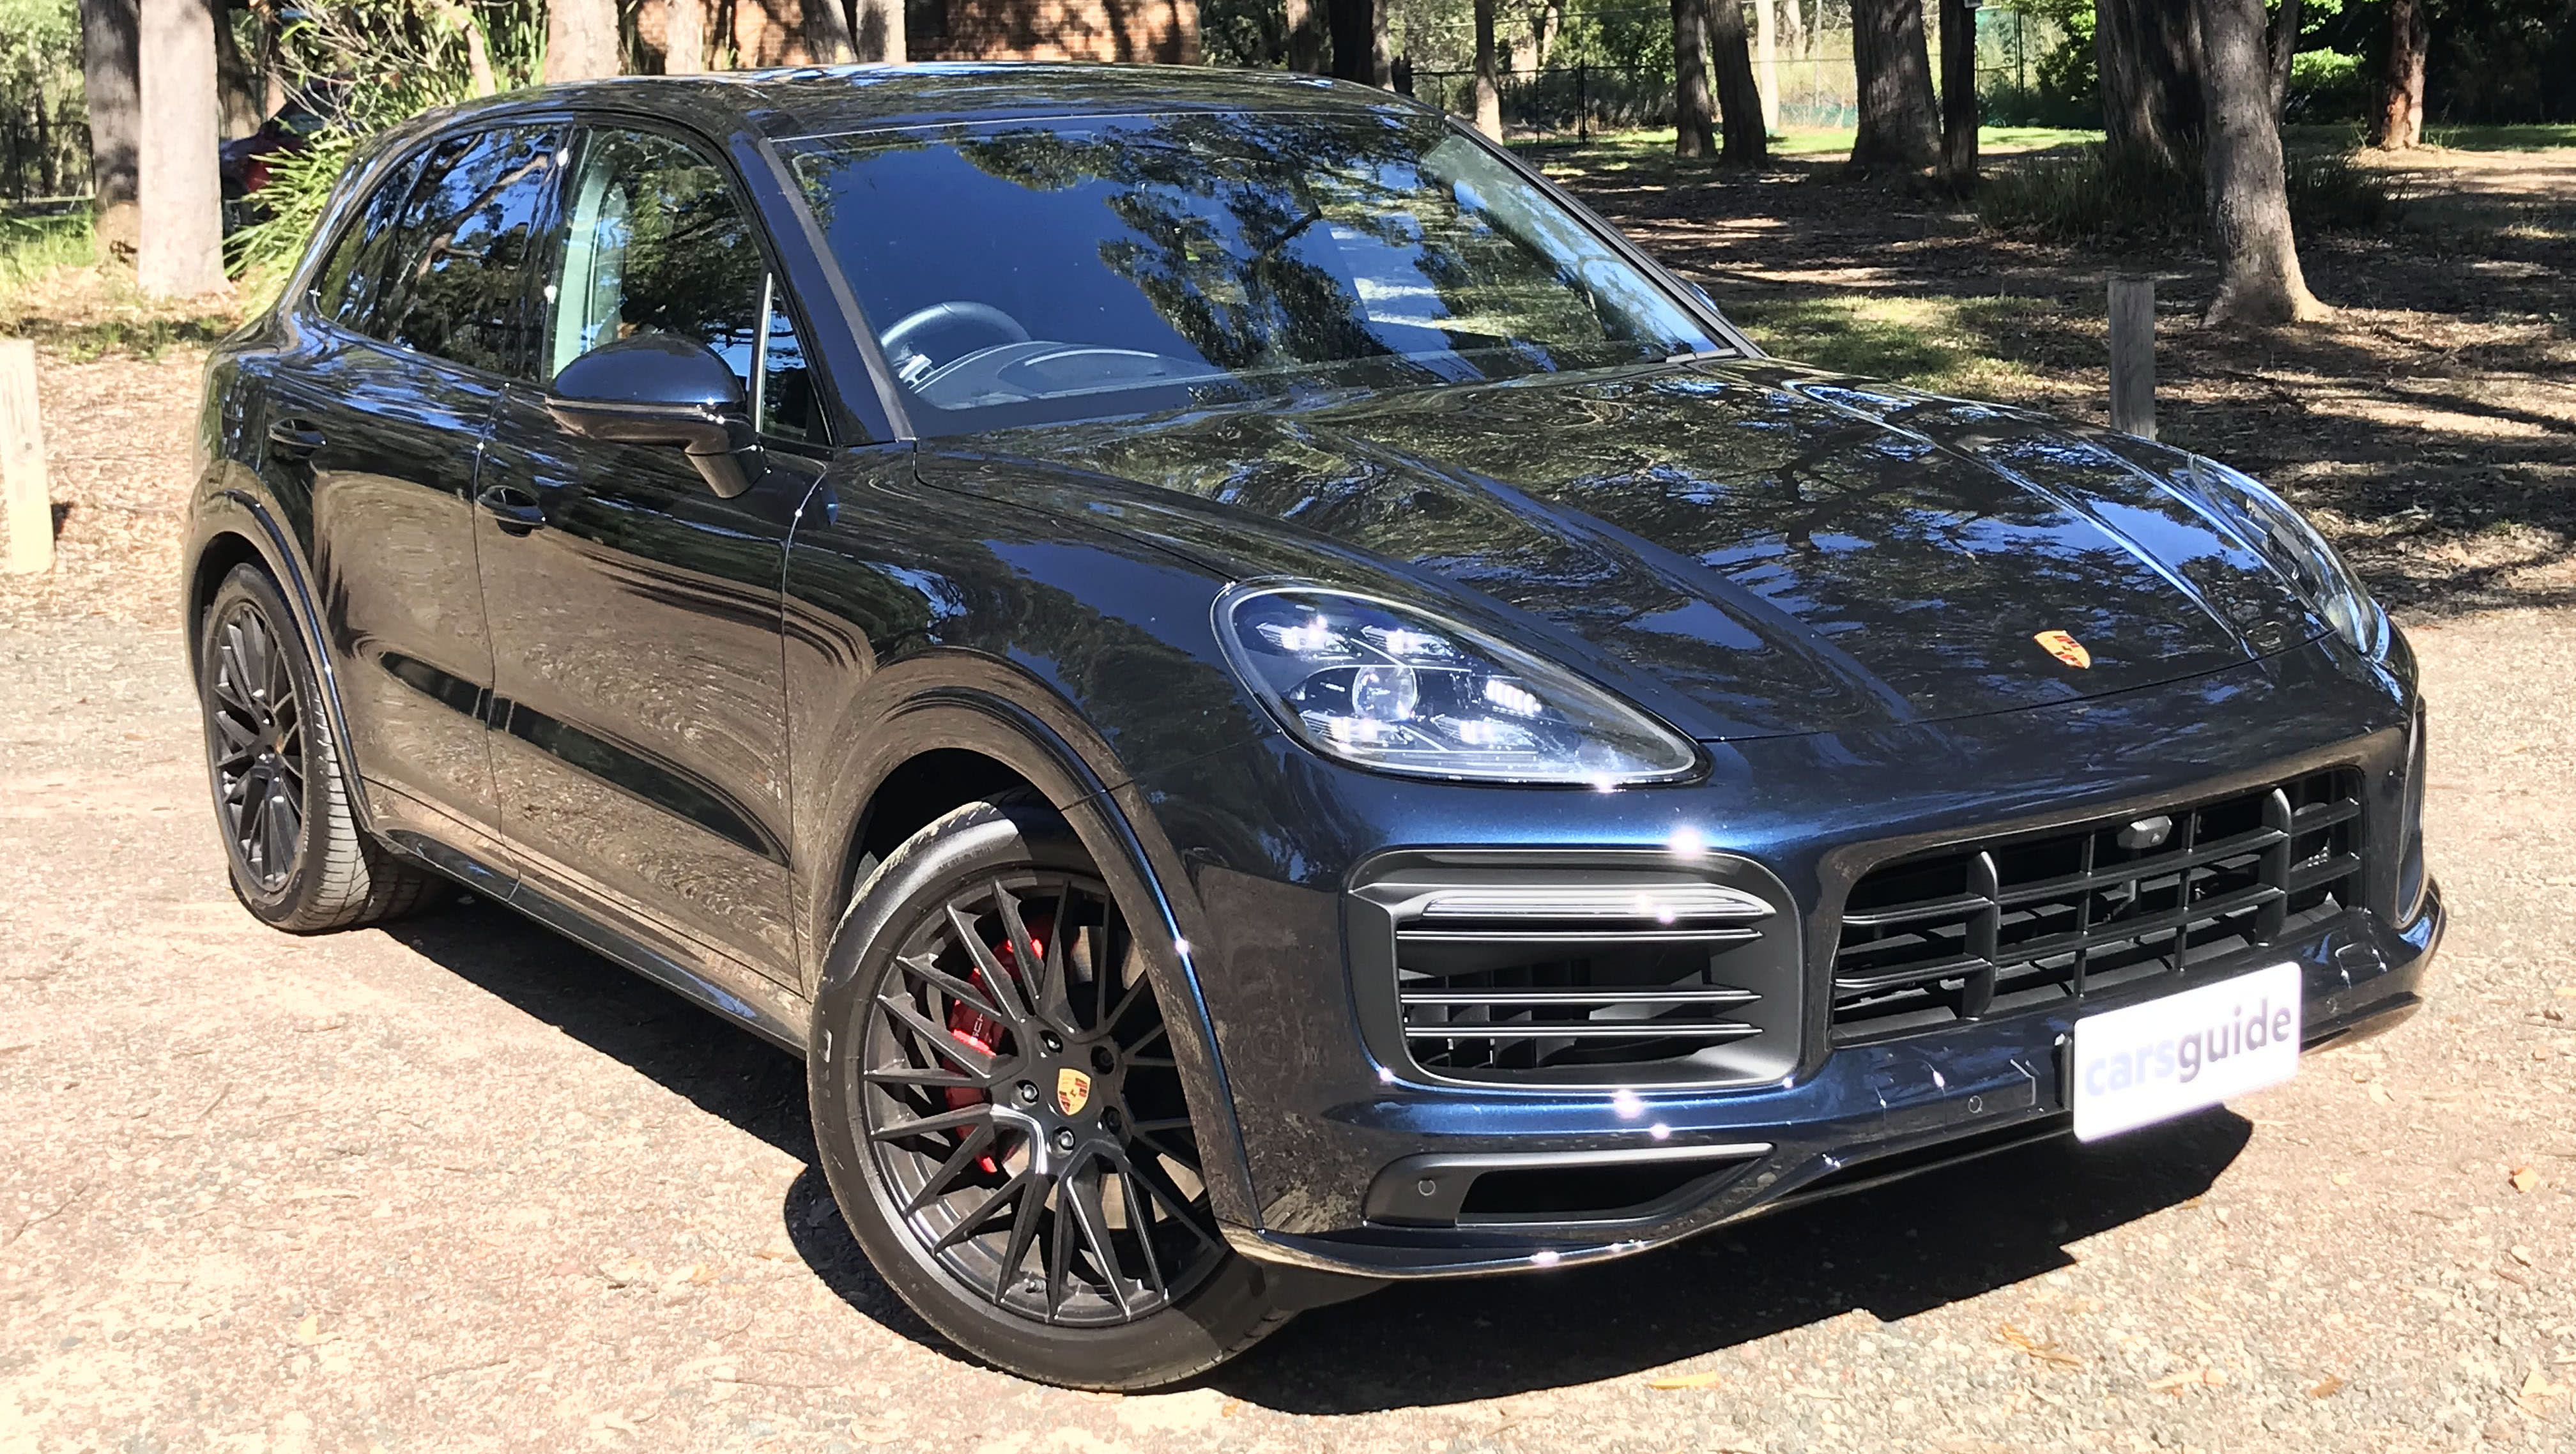 Porsche Cayenne 2021 review: GTS - Twin-turbo V8 SUV is up for the